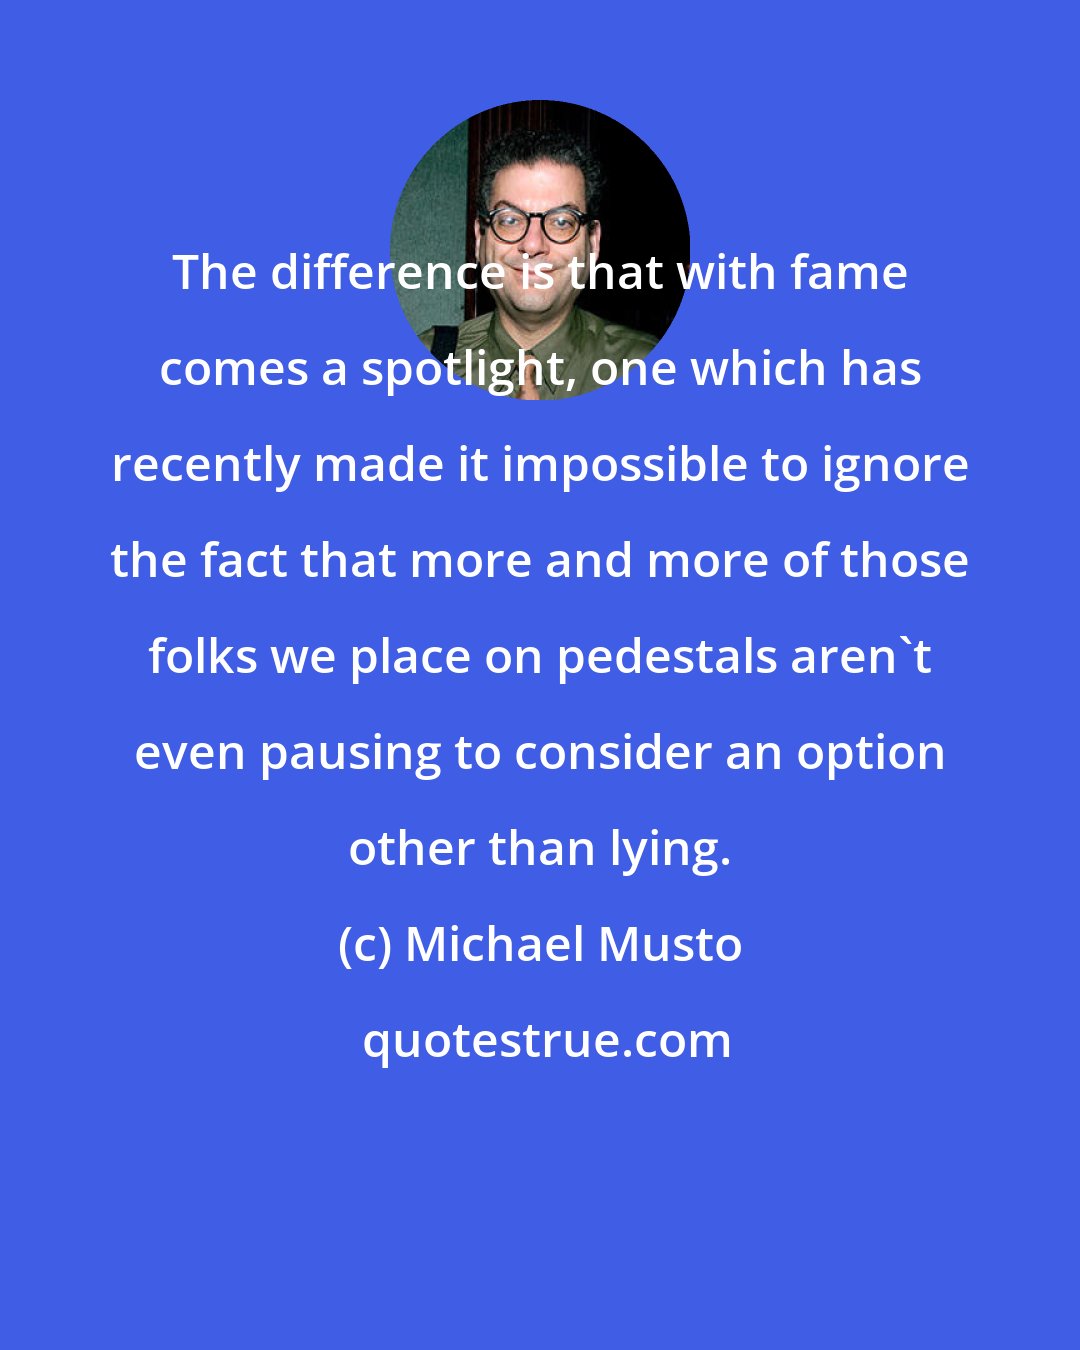 Michael Musto: The difference is that with fame comes a spotlight, one which has recently made it impossible to ignore the fact that more and more of those folks we place on pedestals aren't even pausing to consider an option other than lying.